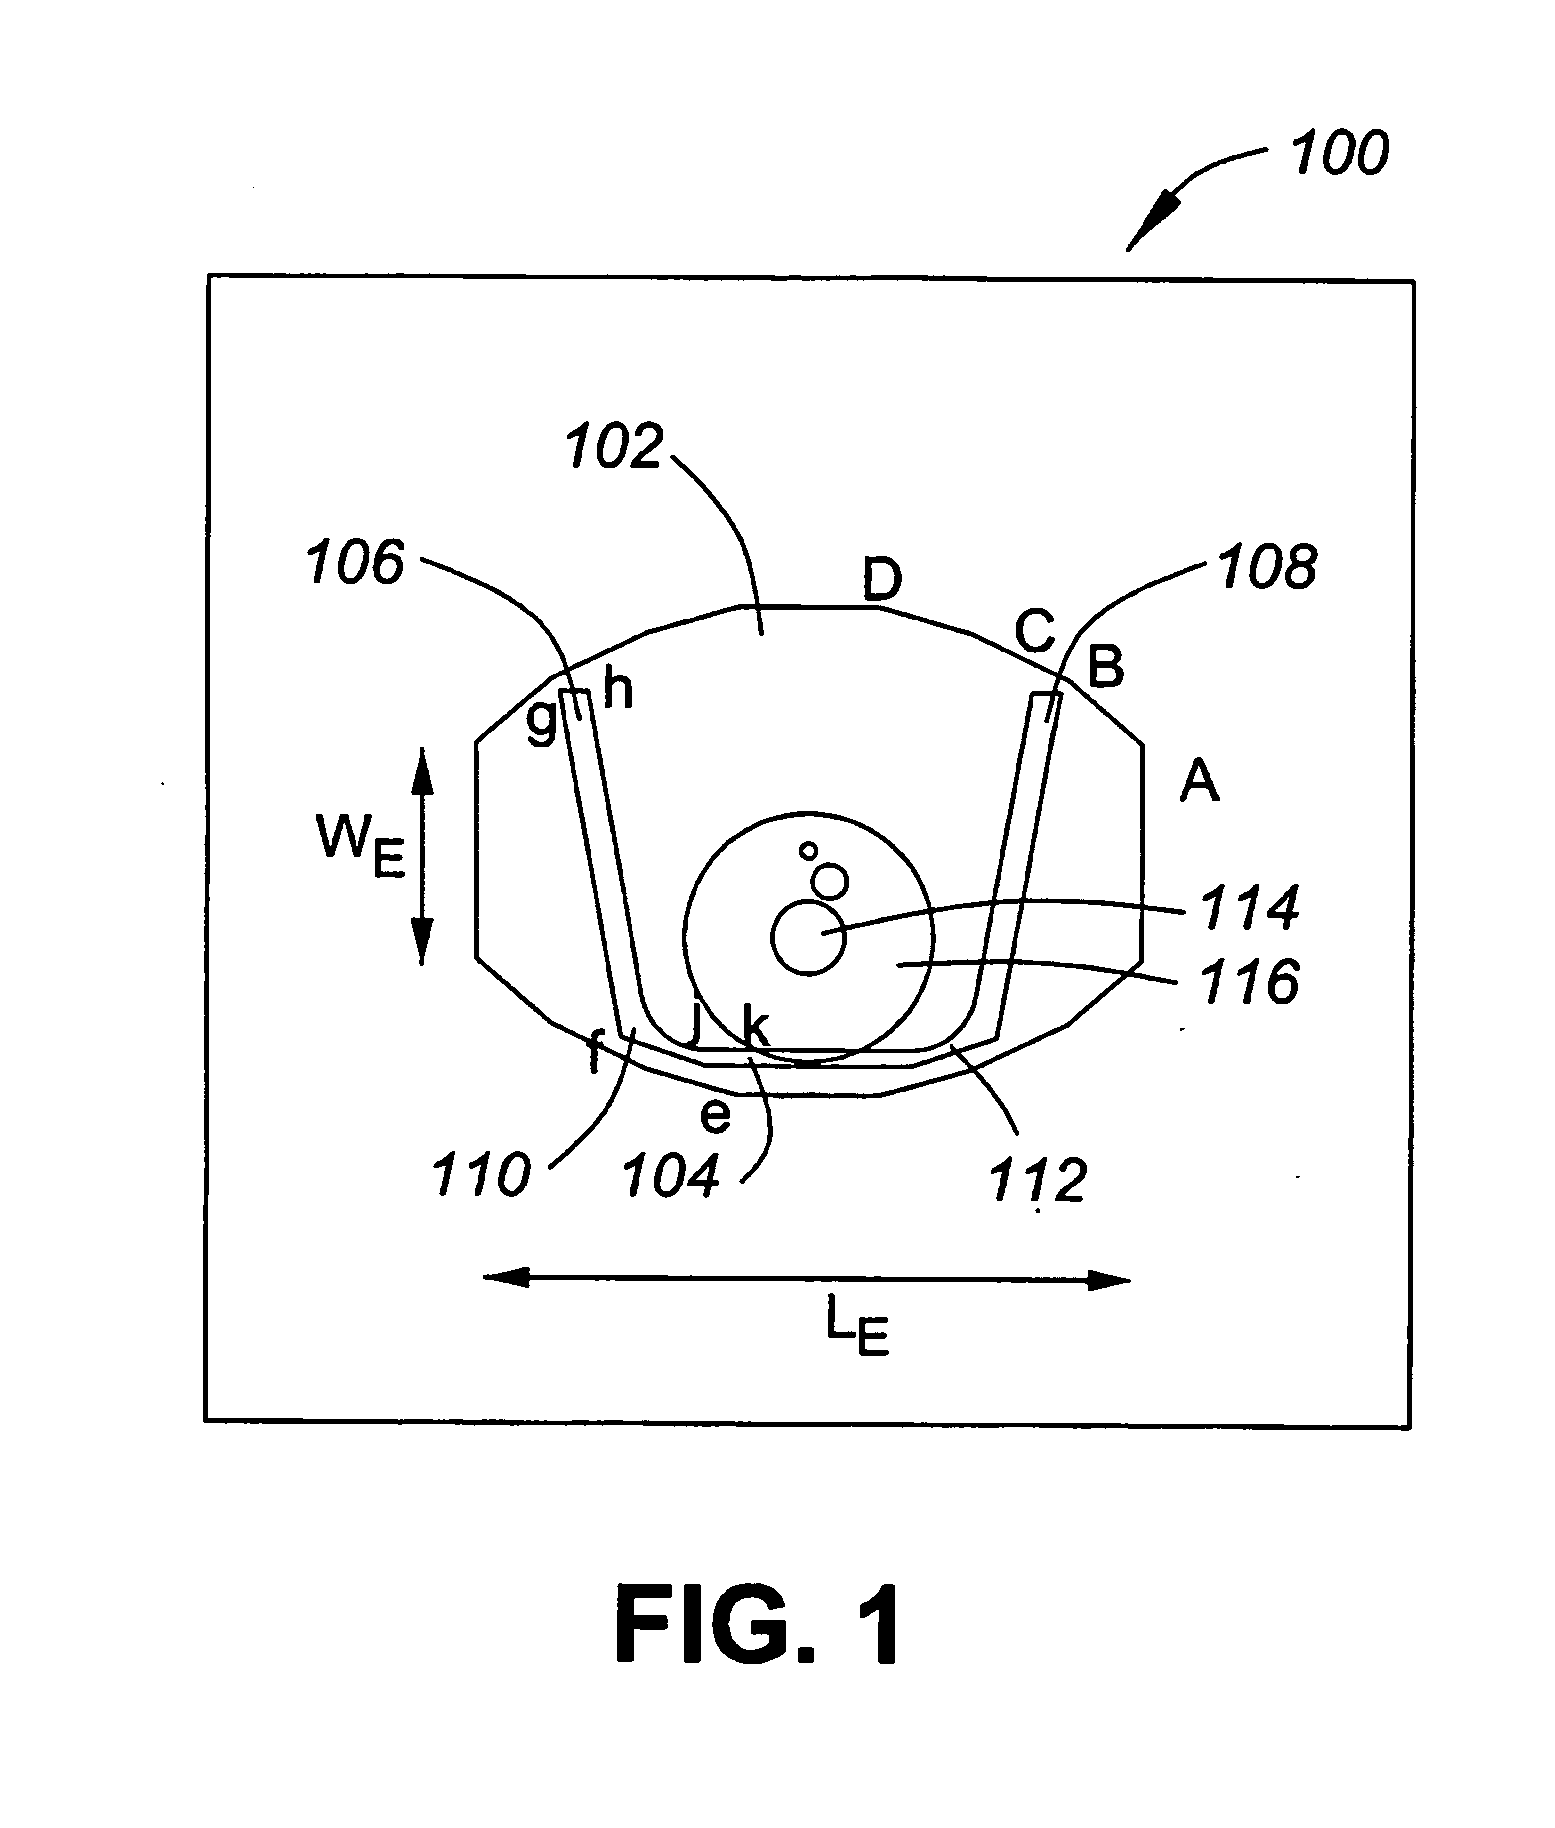 Low profile hybrid phased array antenna system configuration and element